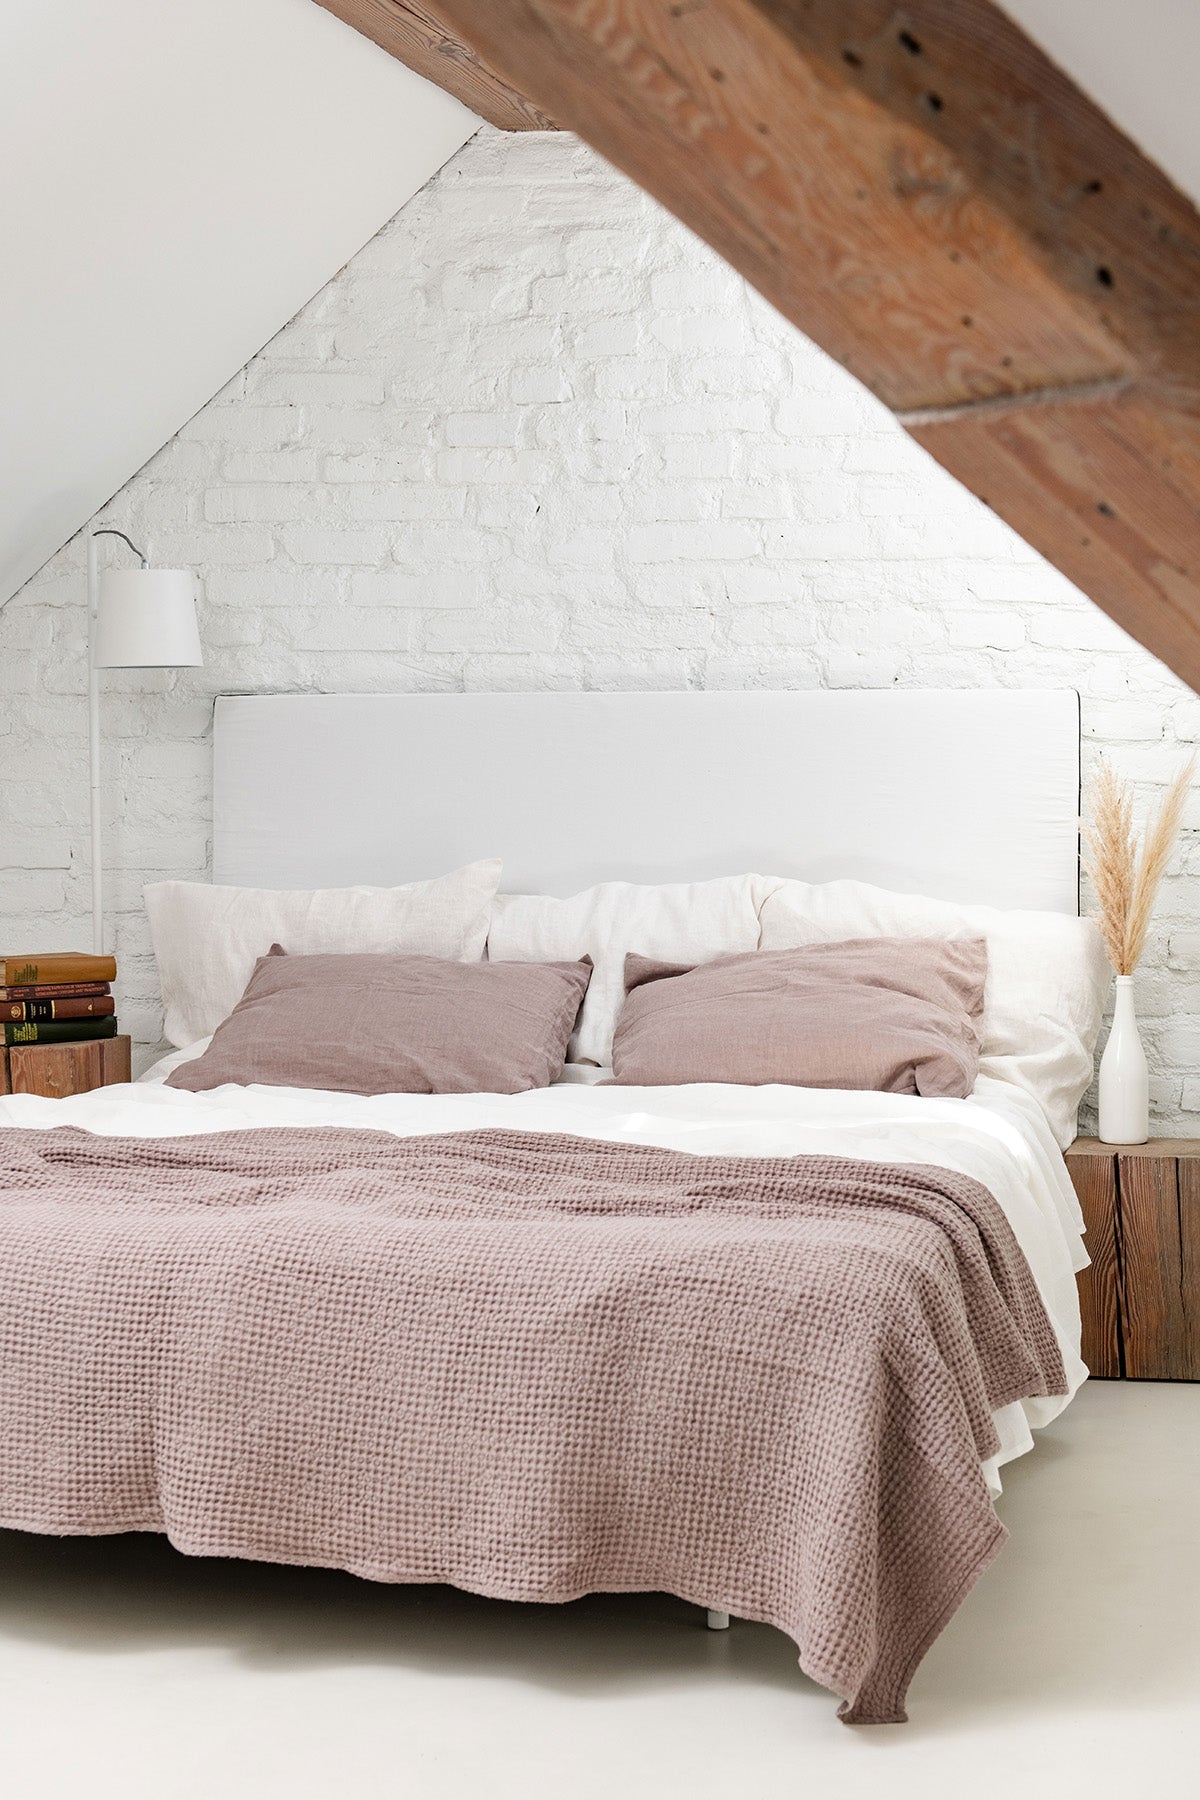 A Stylish Room With A Bed Thas has Linen Waffle Bed Throw in Rosy Brown on It By AmourlInen